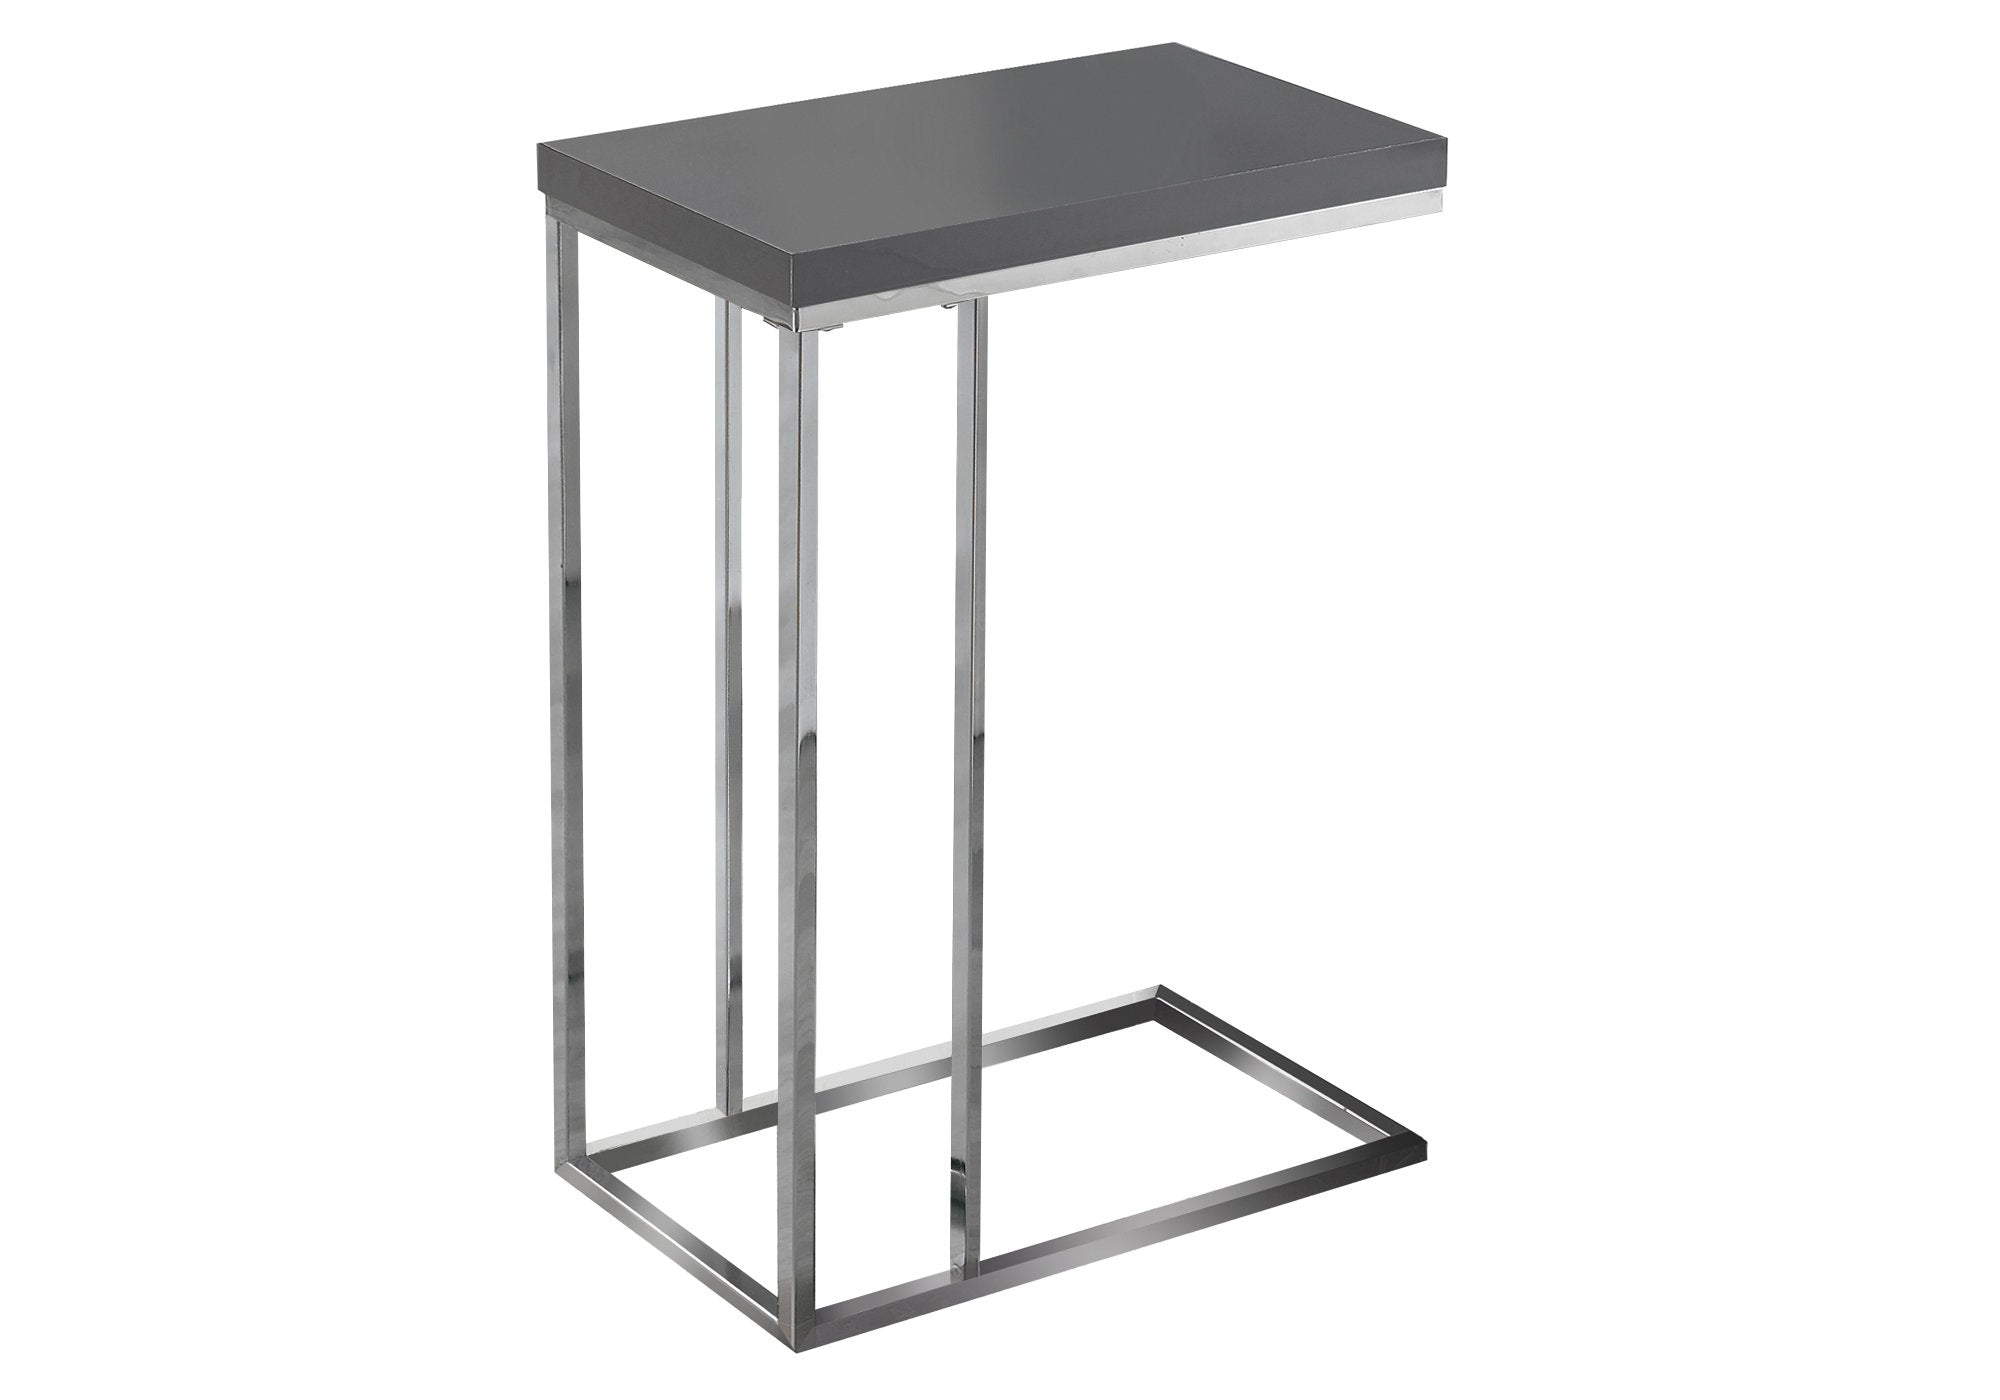 MN-843030    Accent Table, C-Shaped, End, Side, Snack, Living Room, Bedroom, Metal Legs, Laminate, Glossy Grey, Chrome, Contemporary, Modern